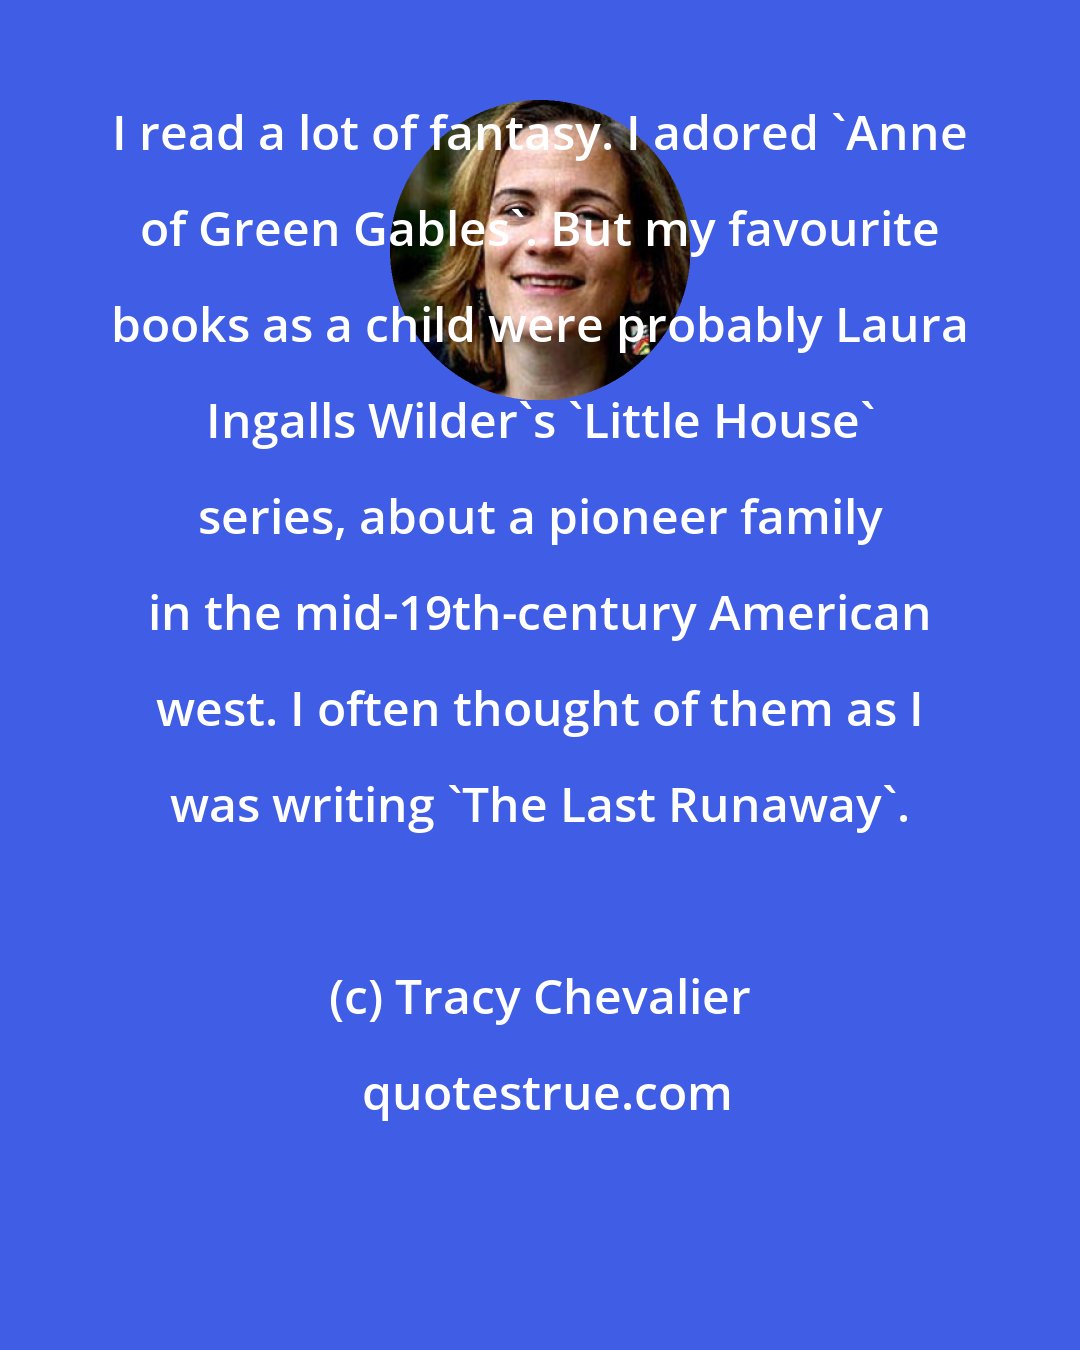 Tracy Chevalier: I read a lot of fantasy. I adored 'Anne of Green Gables'. But my favourite books as a child were probably Laura Ingalls Wilder's 'Little House' series, about a pioneer family in the mid-19th-century American west. I often thought of them as I was writing 'The Last Runaway'.